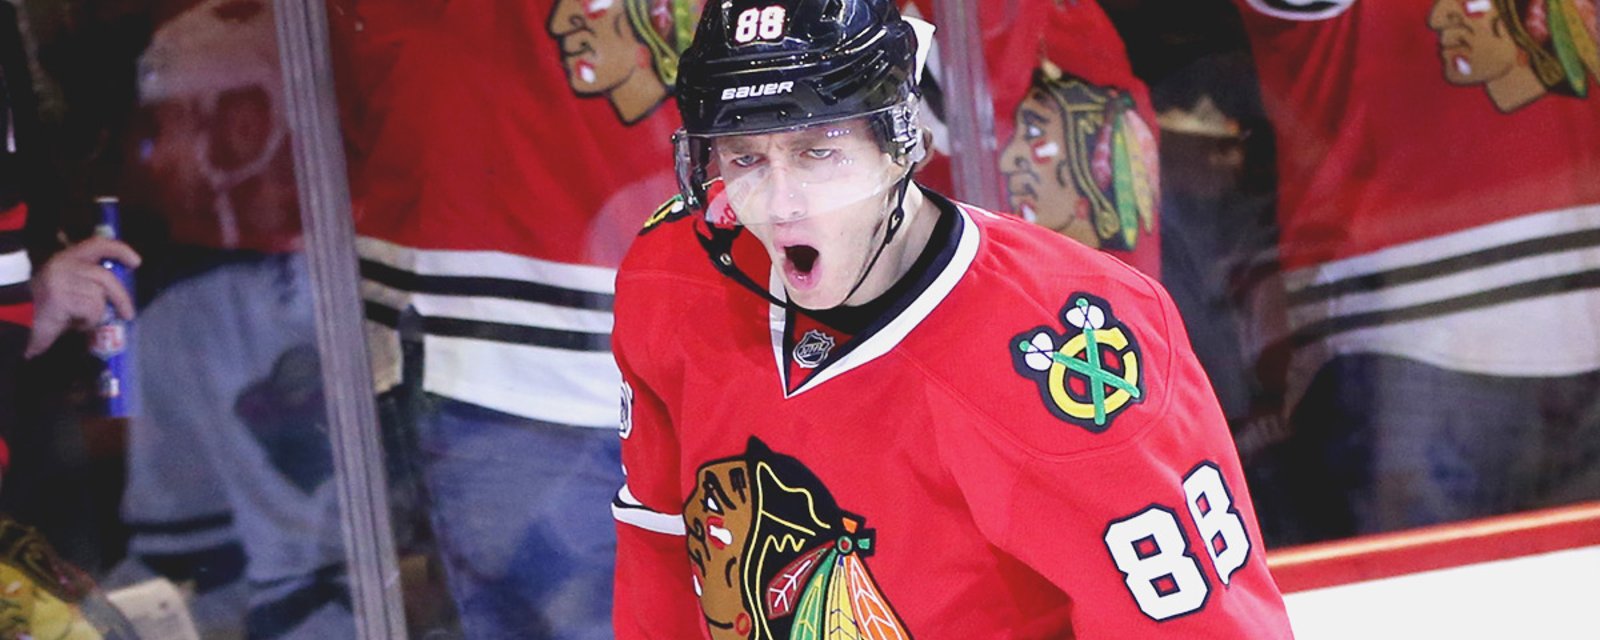 Must see : Patrick Kane's wrist shot was an absolute beauty!